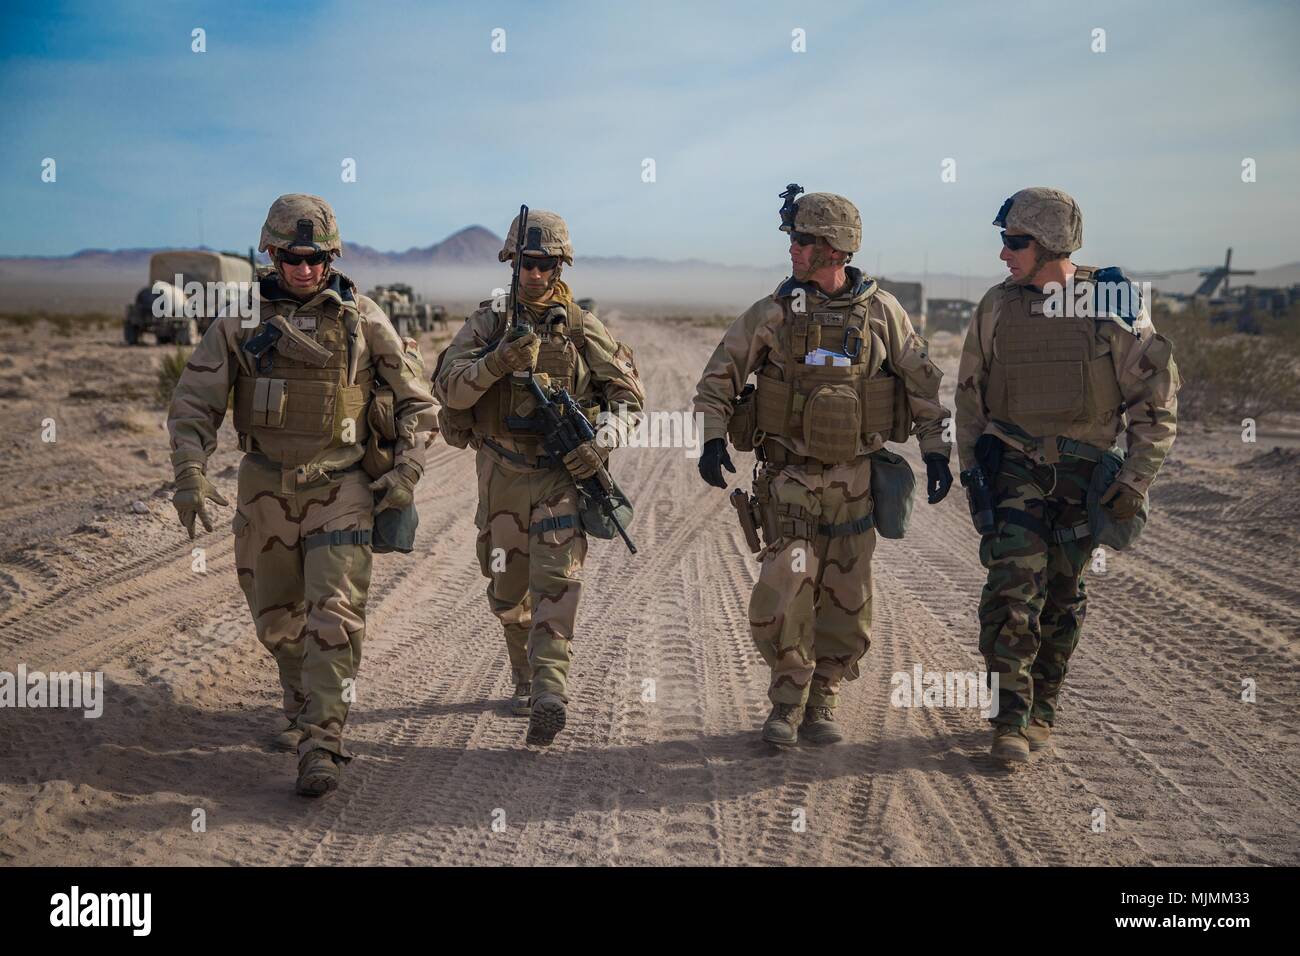 U.S. Marine Corps Maj. Gen. Eric M. Smith, center right, the commanding general for 1st Marine Division, walks alongside his staff during a battle field circulation (BFC) at Marine Corps Air Ground Combat Center, Twentynine Palms, Calif., Dec. 10, 2017. Smith's BFC consisted of visiting various units participating in exercise Steel Knight 2018. (U.S. Marines Corps photo by Staff Sgt. Gabriela Garcia) Stock Photo